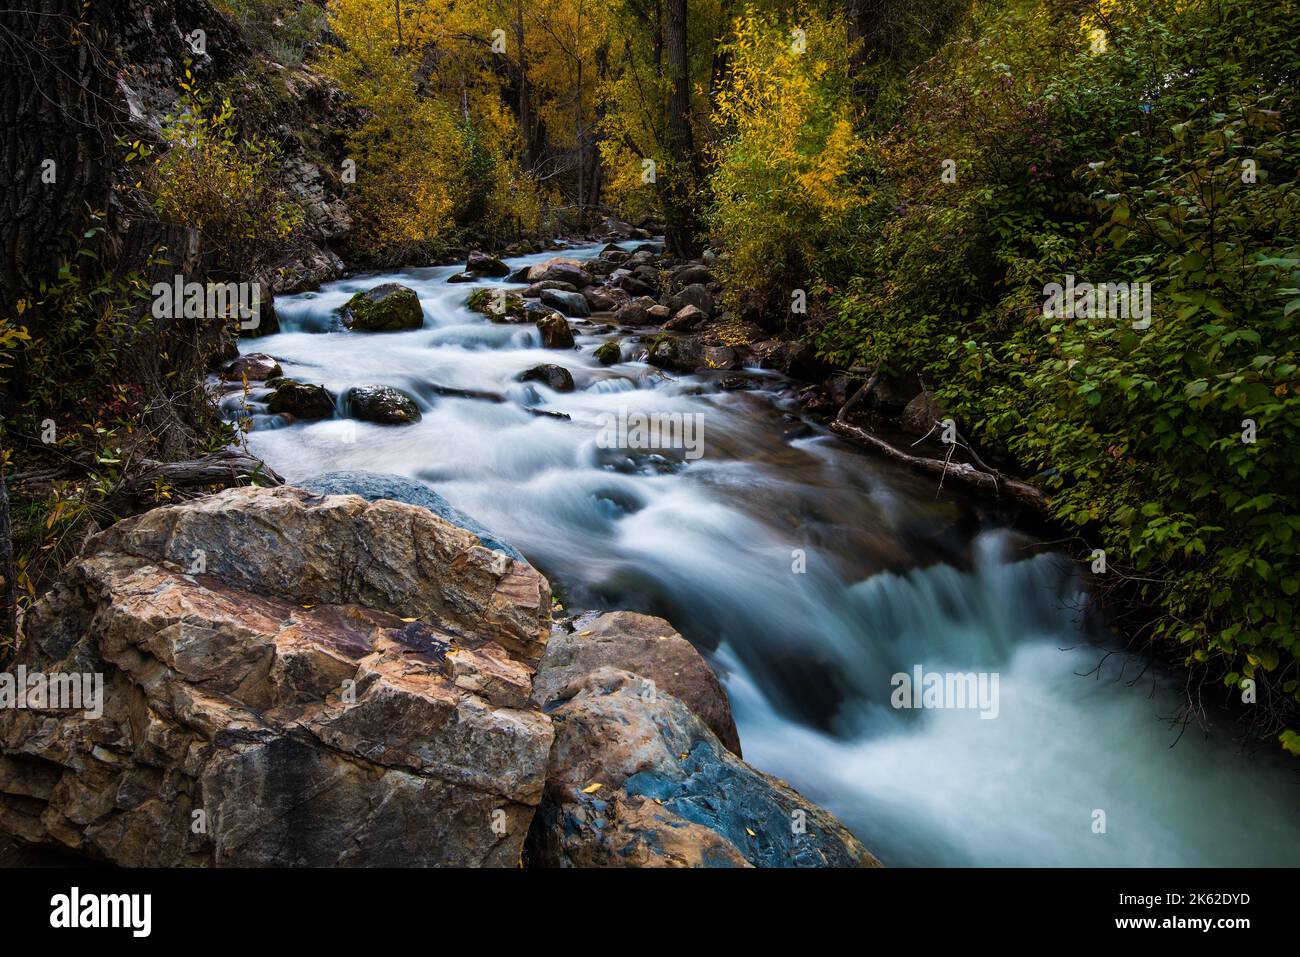 Beautiful mountain stream in the Wasatch Mountains of Utah, USA.  This is one of many scenic mtn. streams east of Salt Lake City. Stock Photo